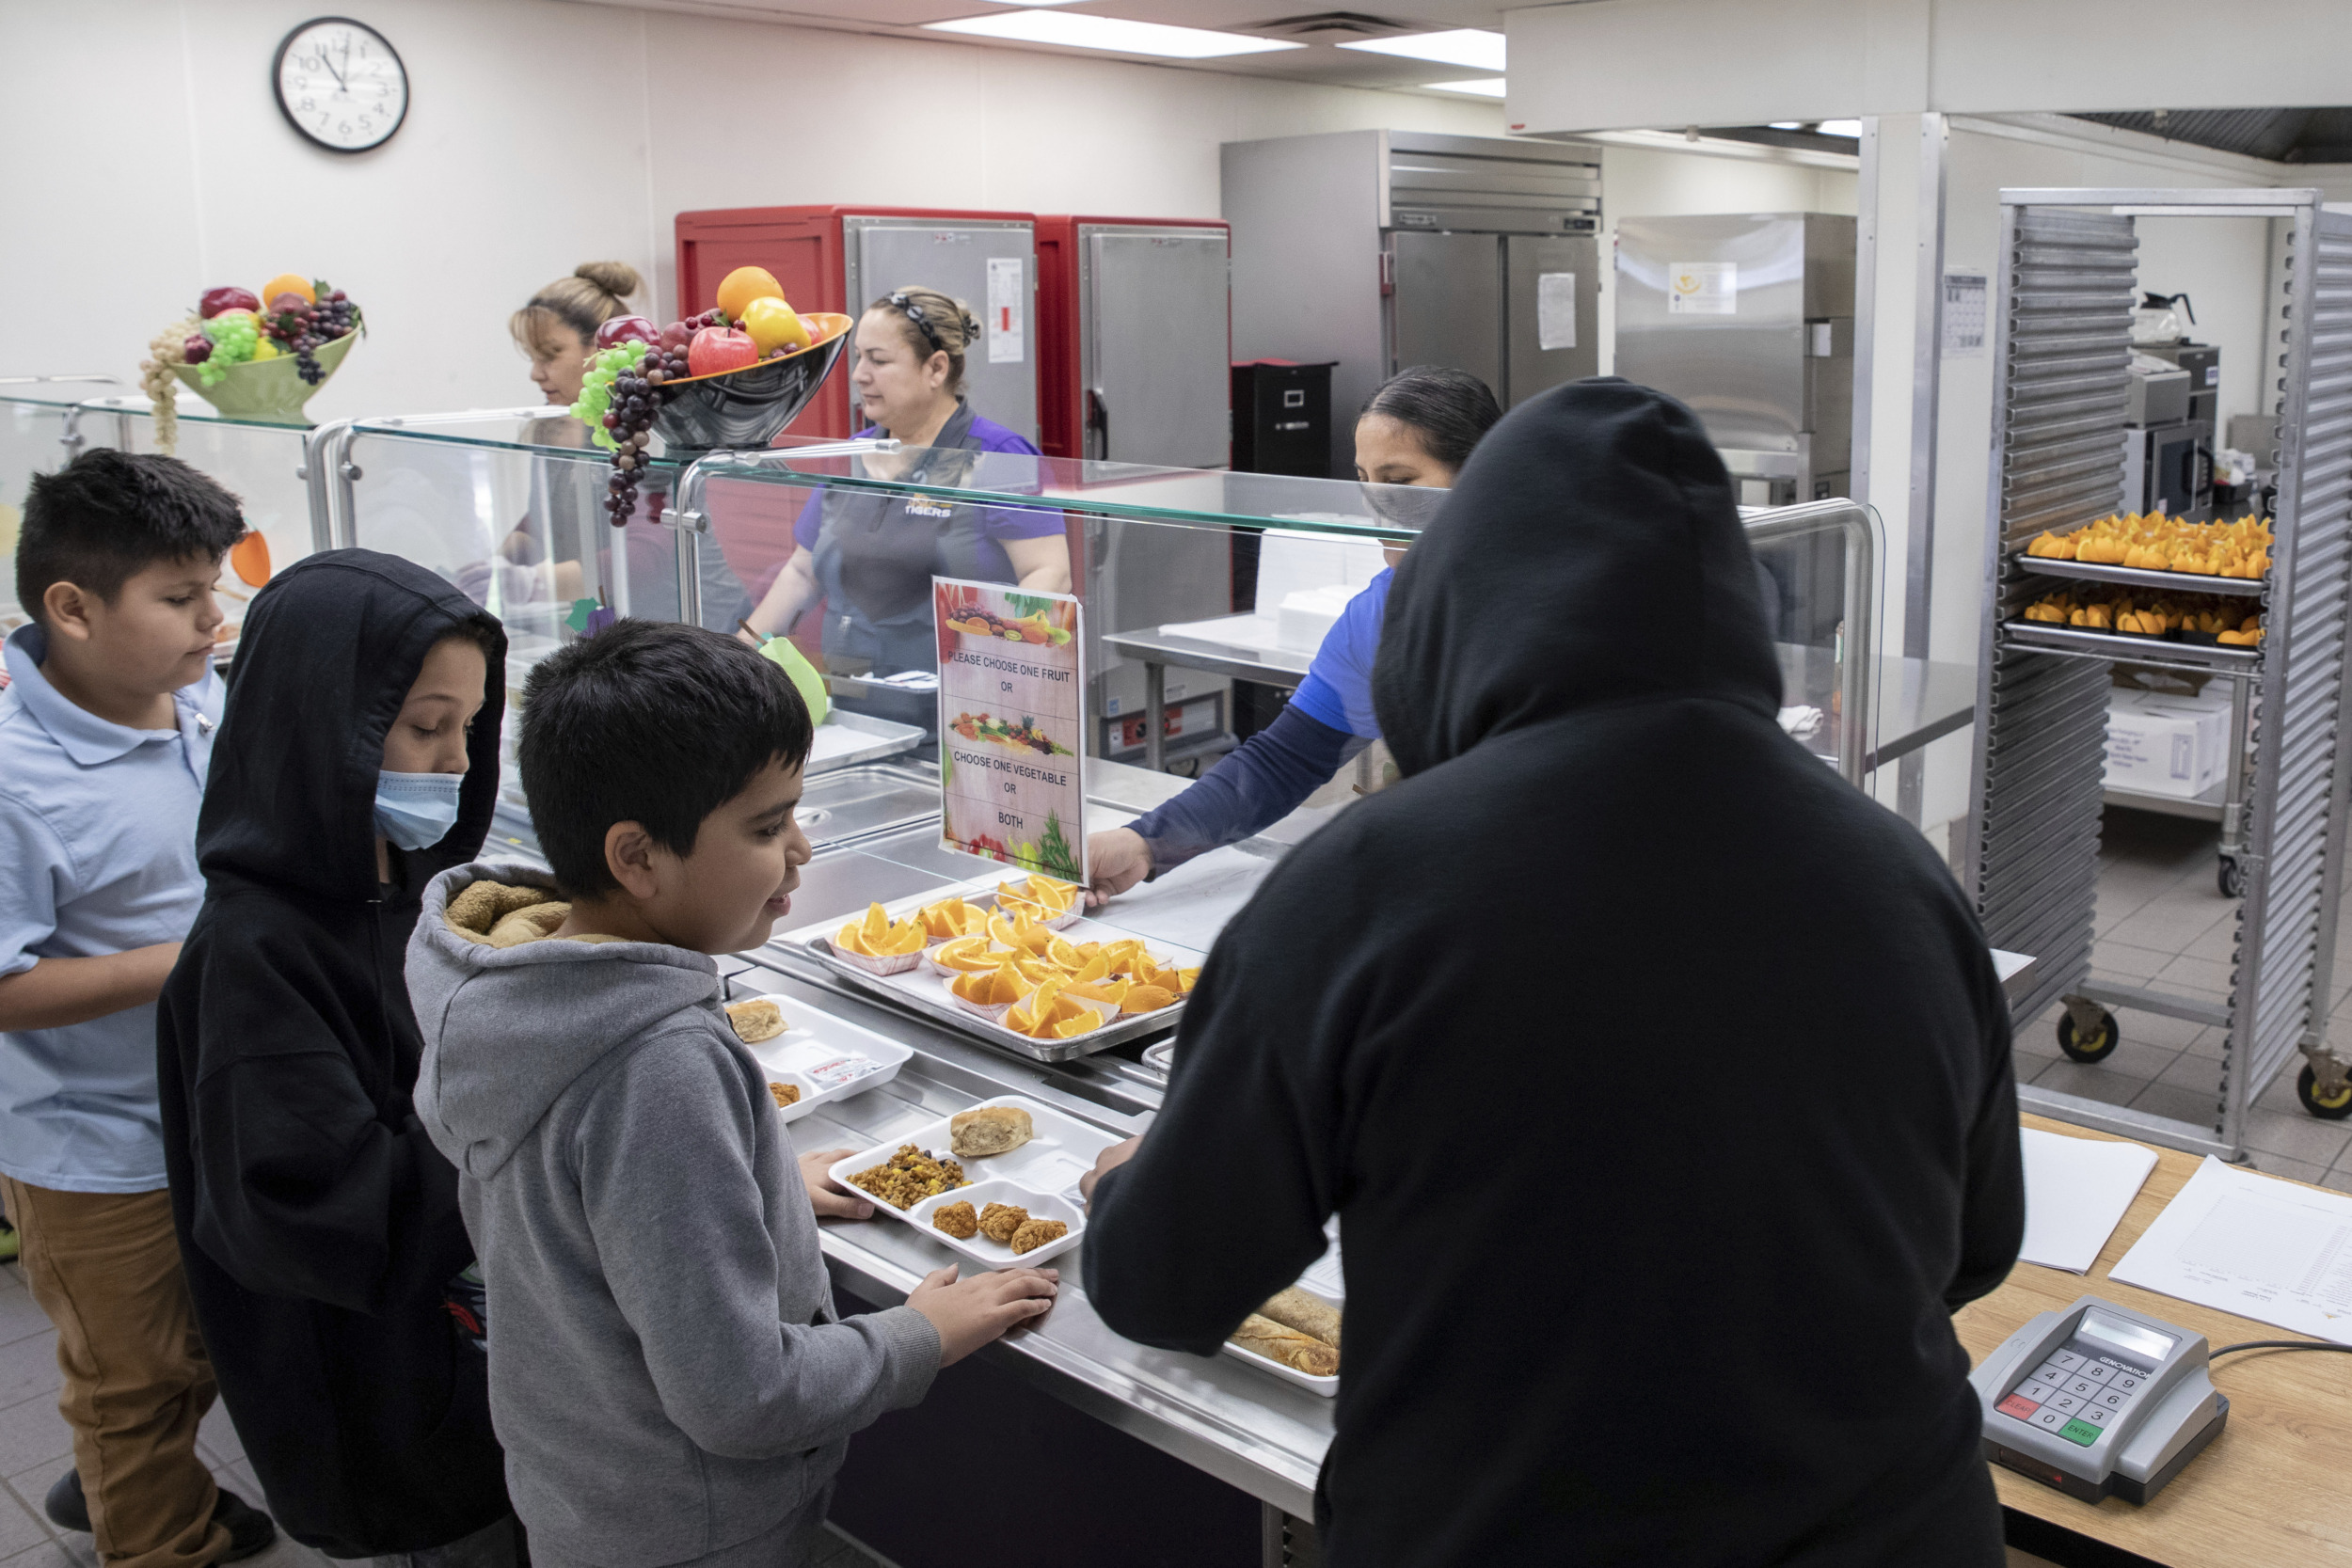 Hungry Kids: Elementay students stand in line adding food to their food trays in school cafeteria